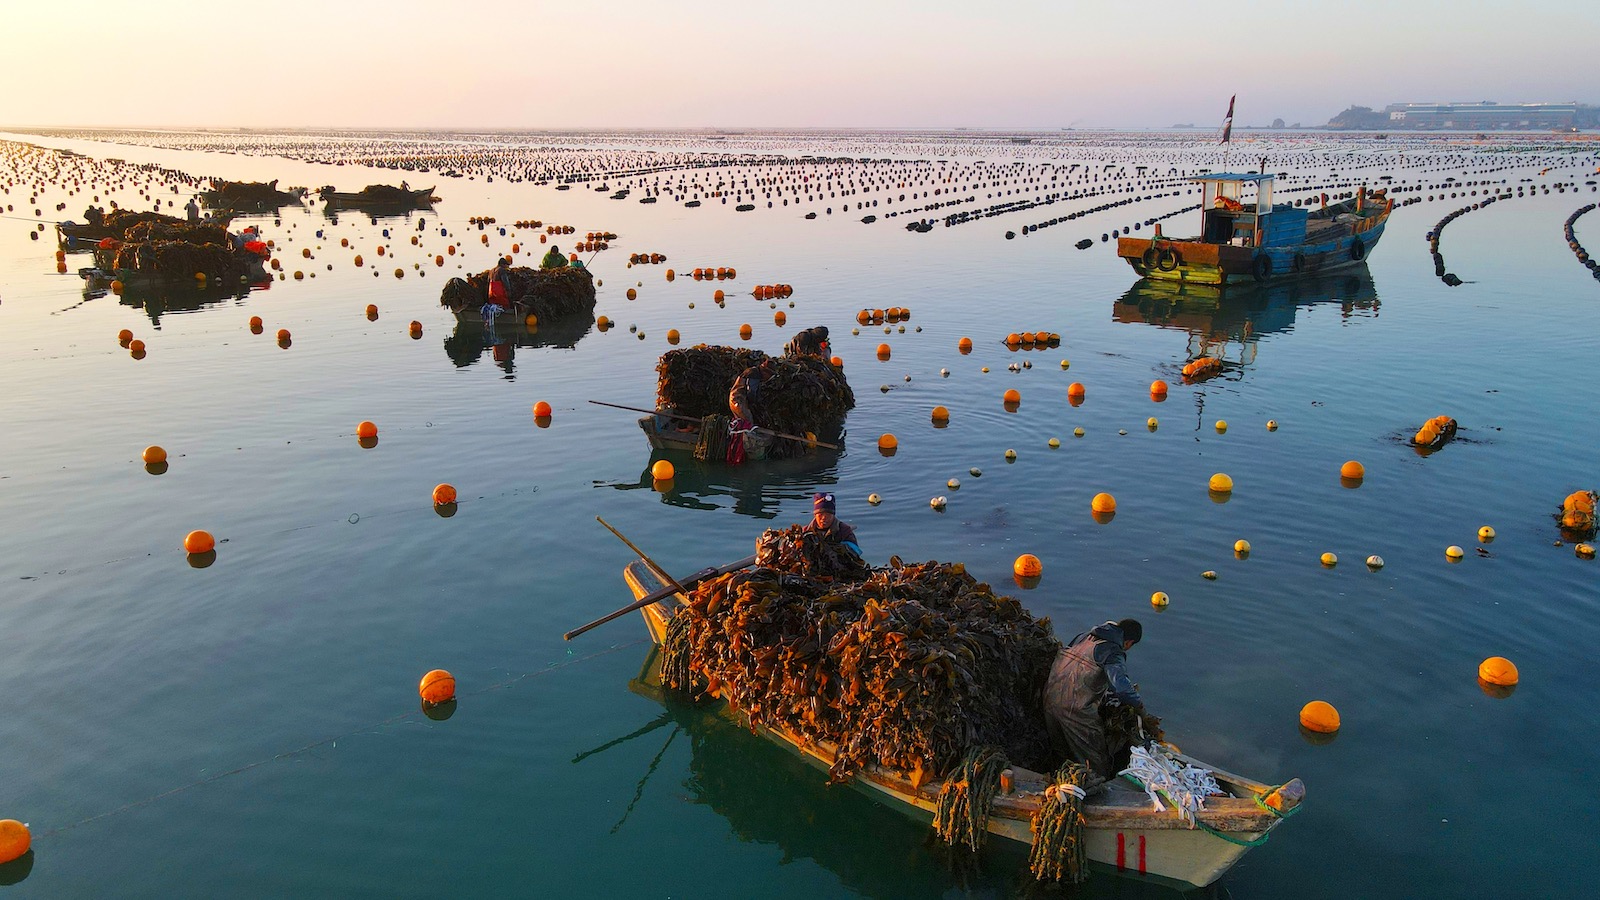 Fishermen in several boats on the calm waters off the coast of Rongcheng, Shandong Province of China harvest kelp into boats piled high with it.